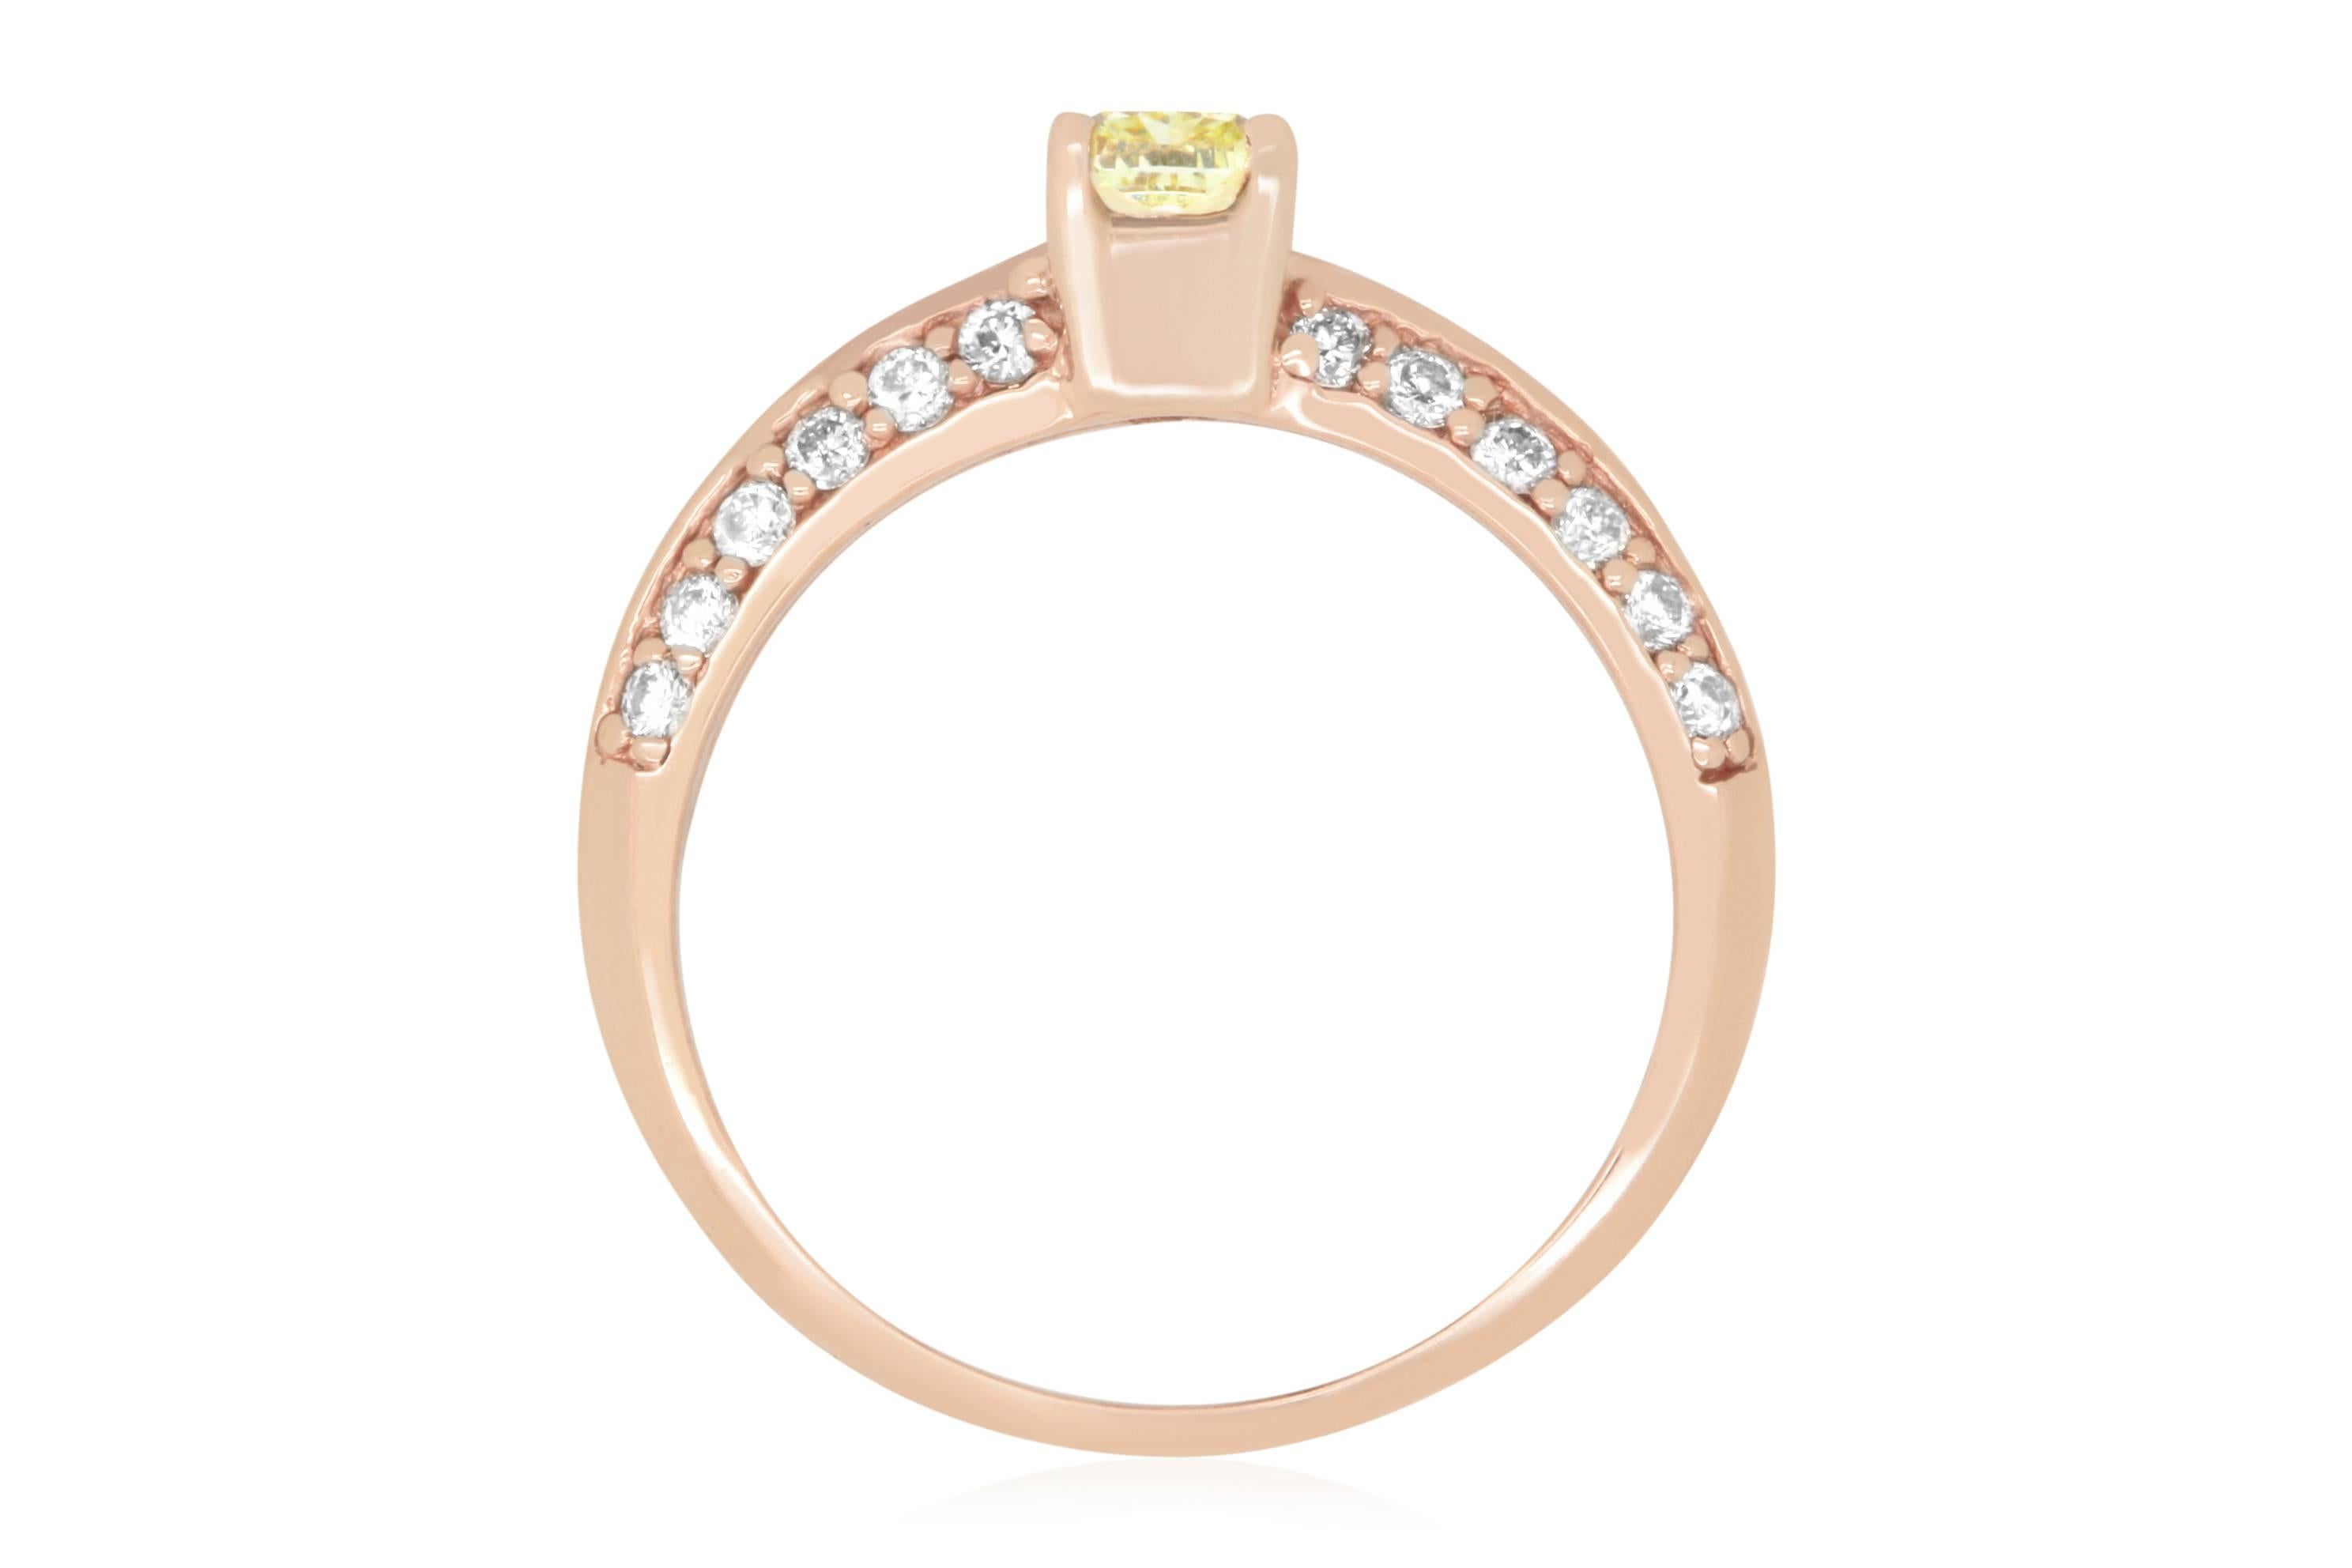 Material: 14k Rose Gold 
Center Stone Details: 1 Cushion Cut Yellow Diamond at 0.51 Carats 
Stone Details: 24 Round White Diamonds at 0.37 Carats - Carat - Clarity: VS-SI  / Color: H-I
Ring Size: Size 6.5. Alberto offers complimentary sizing on all